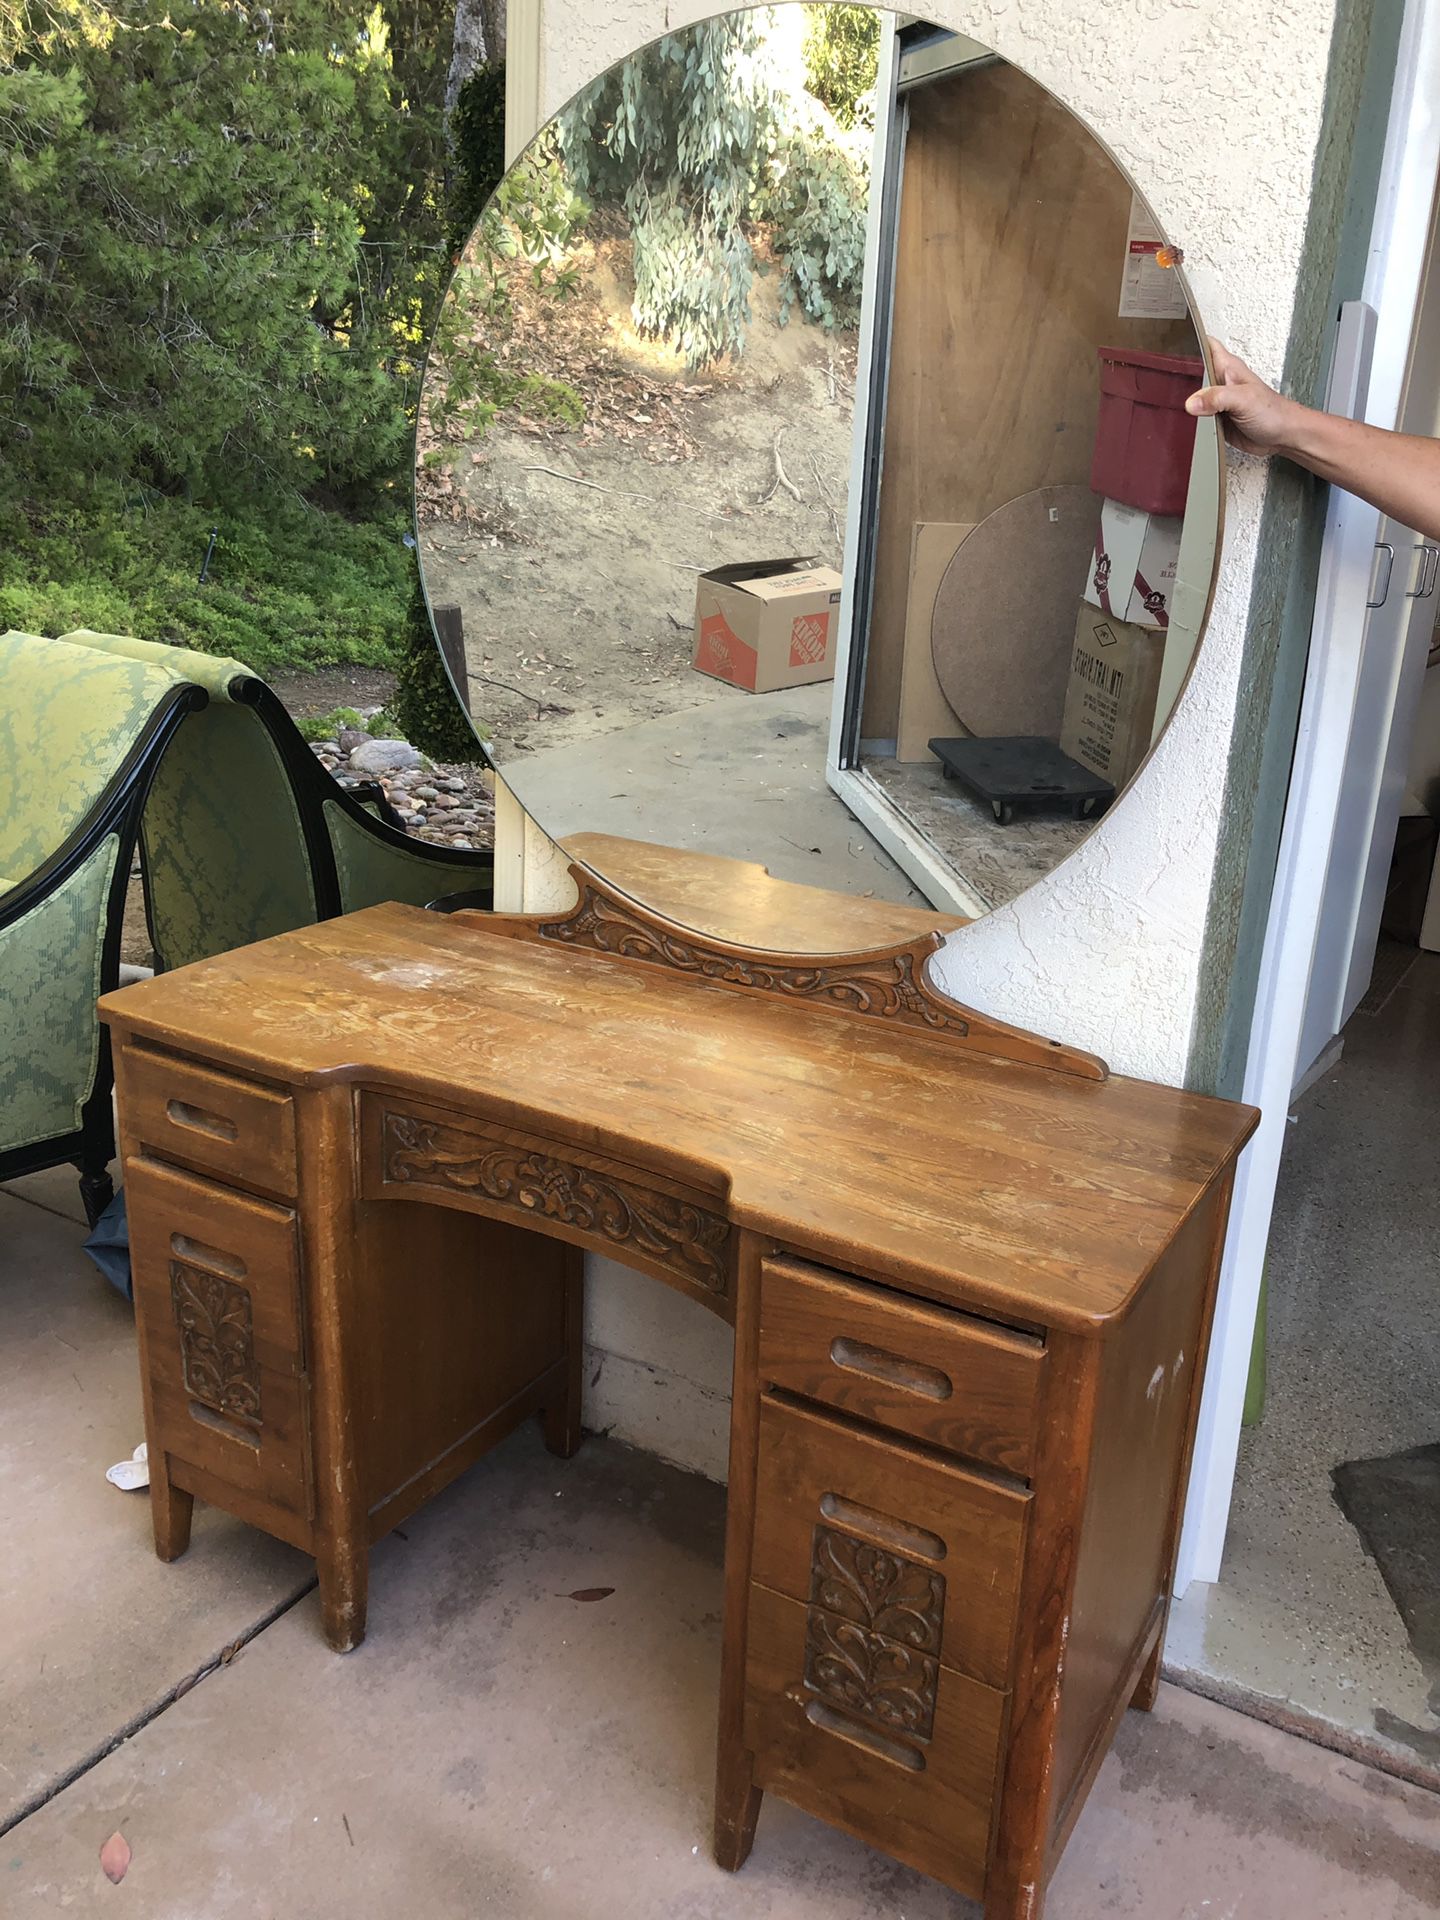 Beautiful antique desk and mirror